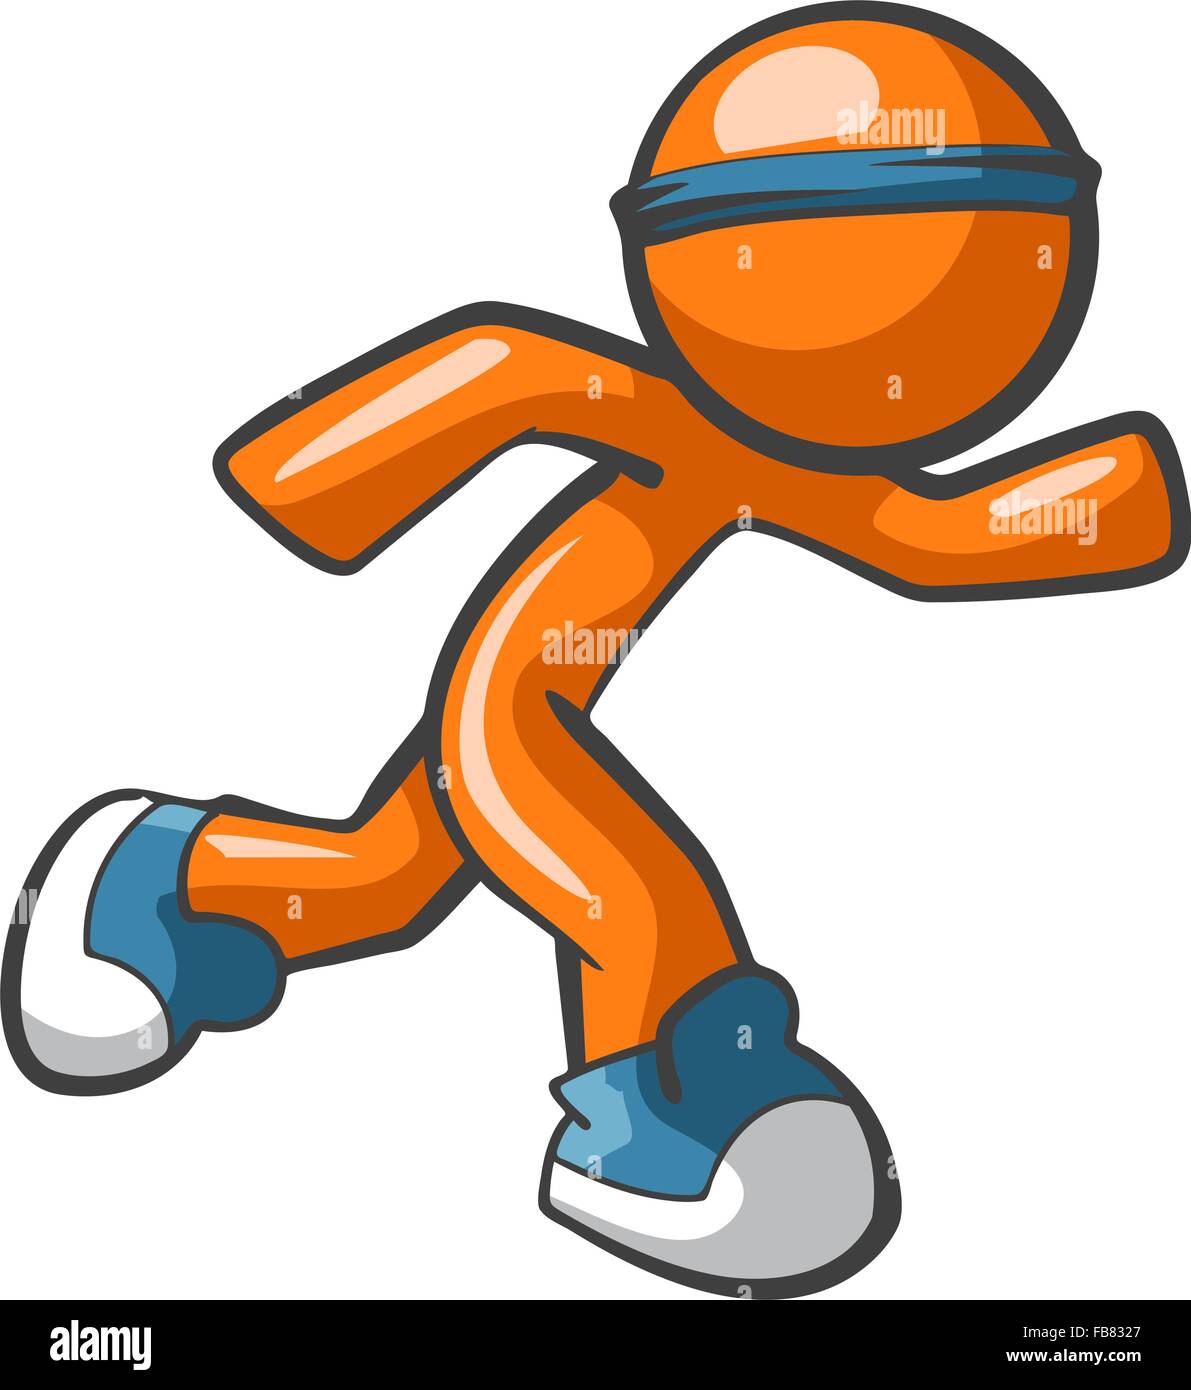 Orange man running with blue shoes and headband, fast and agile. Sports and fast services concept, quite diverse. Stock Vector